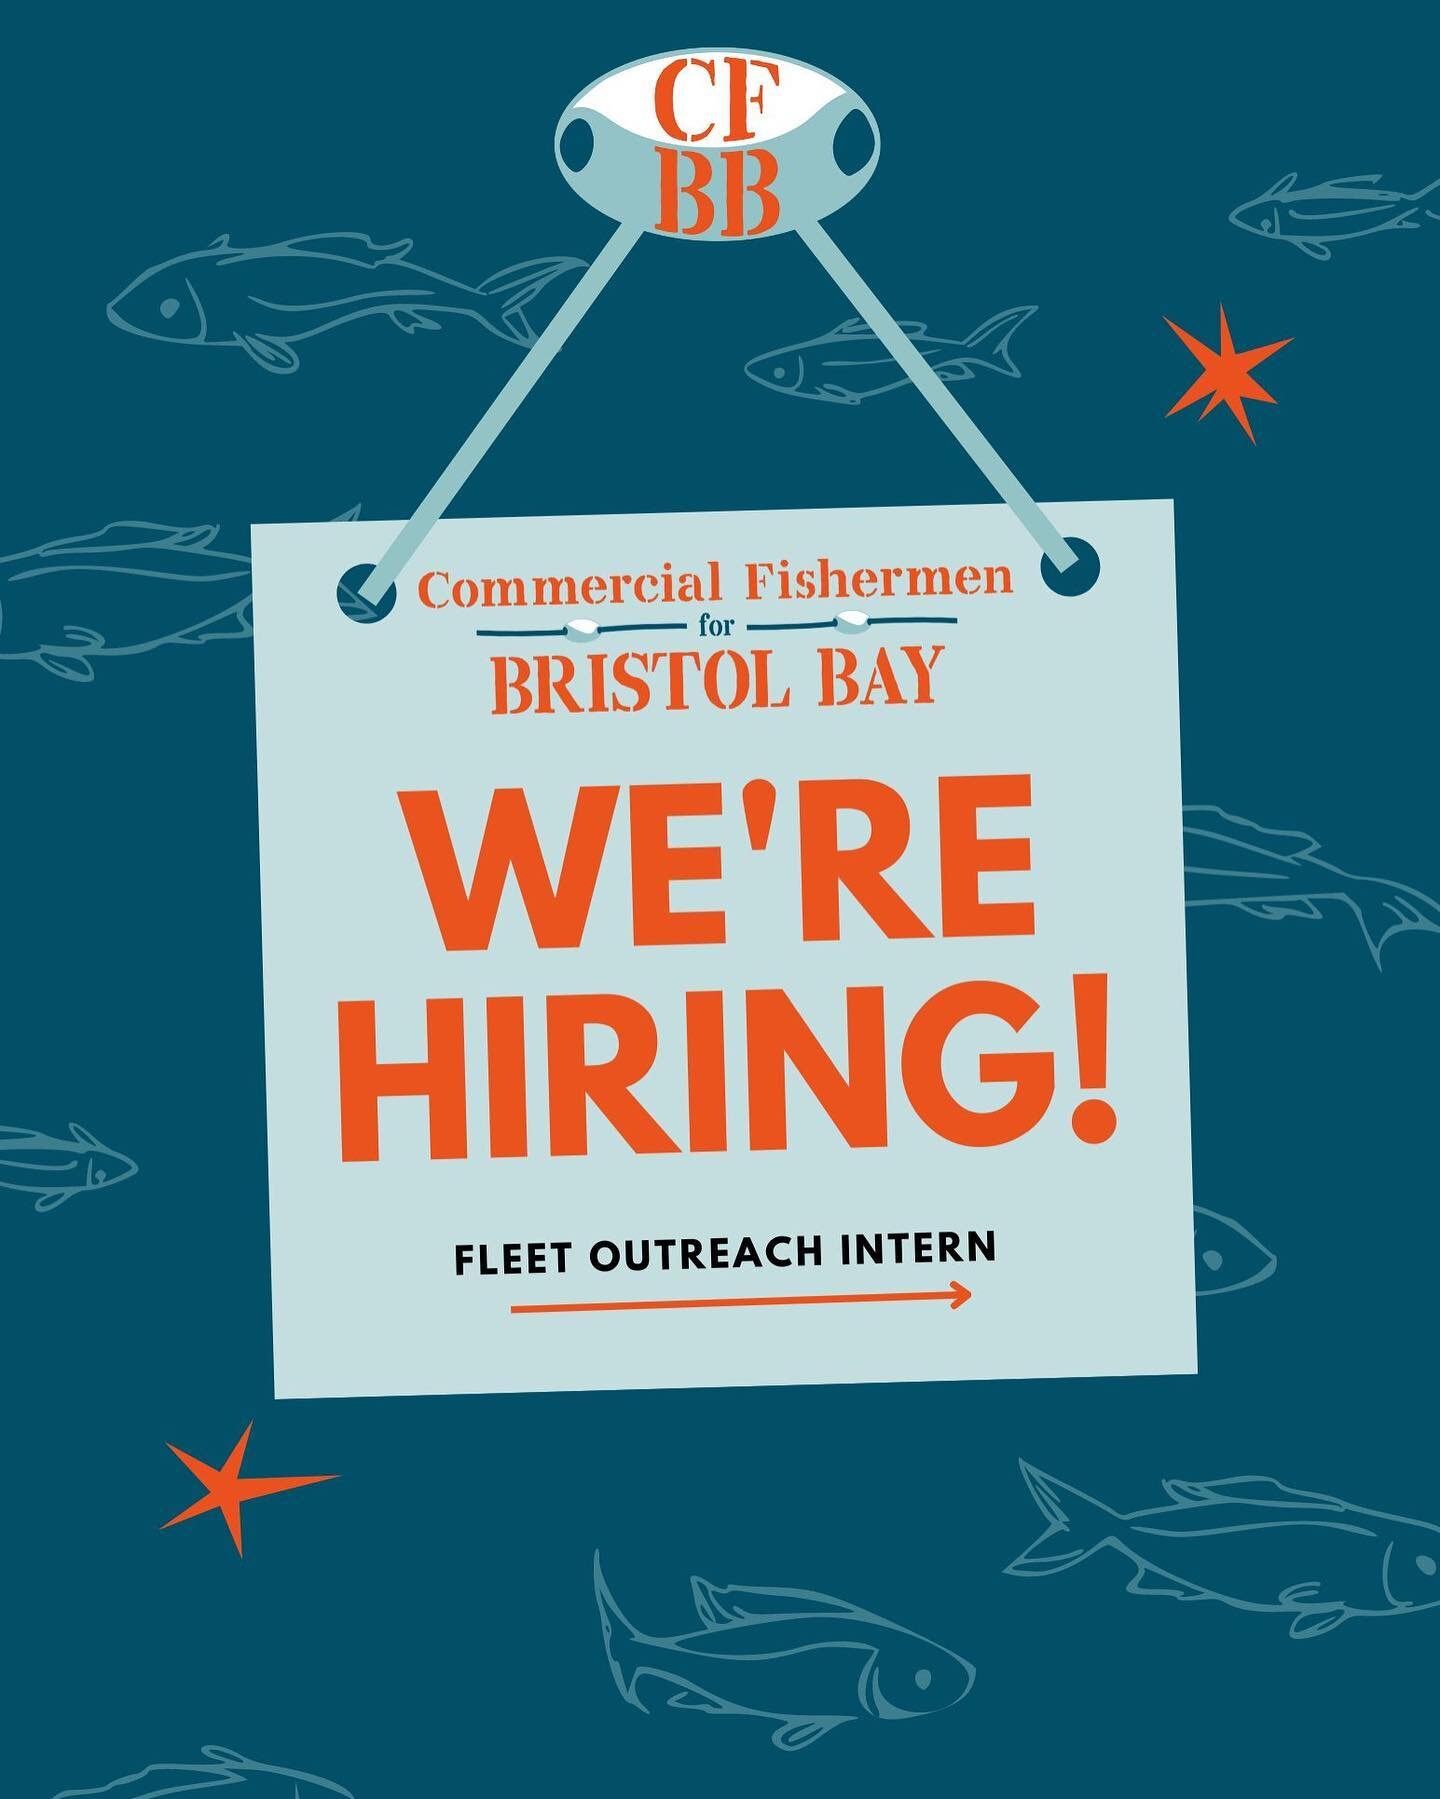 Our staff is looking for another crew member in Bristol Bay this summer to help with shore based operations! Check out our job posting. This is a BBEDC internship so applicants must be watershed/CDQ residents, at least 18 years or older. Position is 